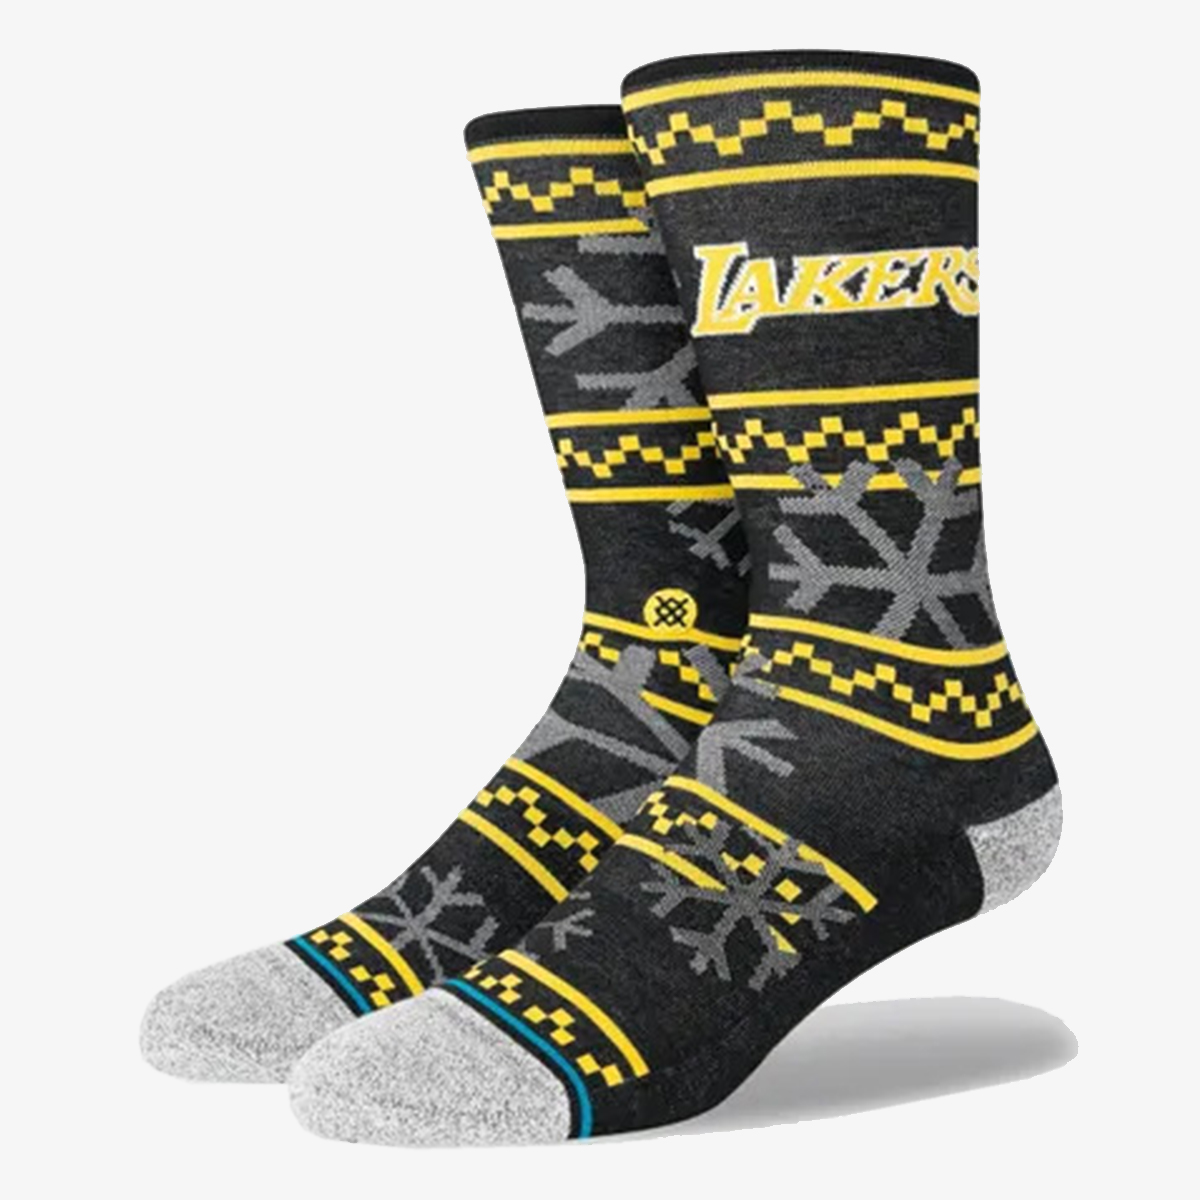 STANCE Чорапи LAKERS FROSTED 2 BLACK L CREW LIGHT 